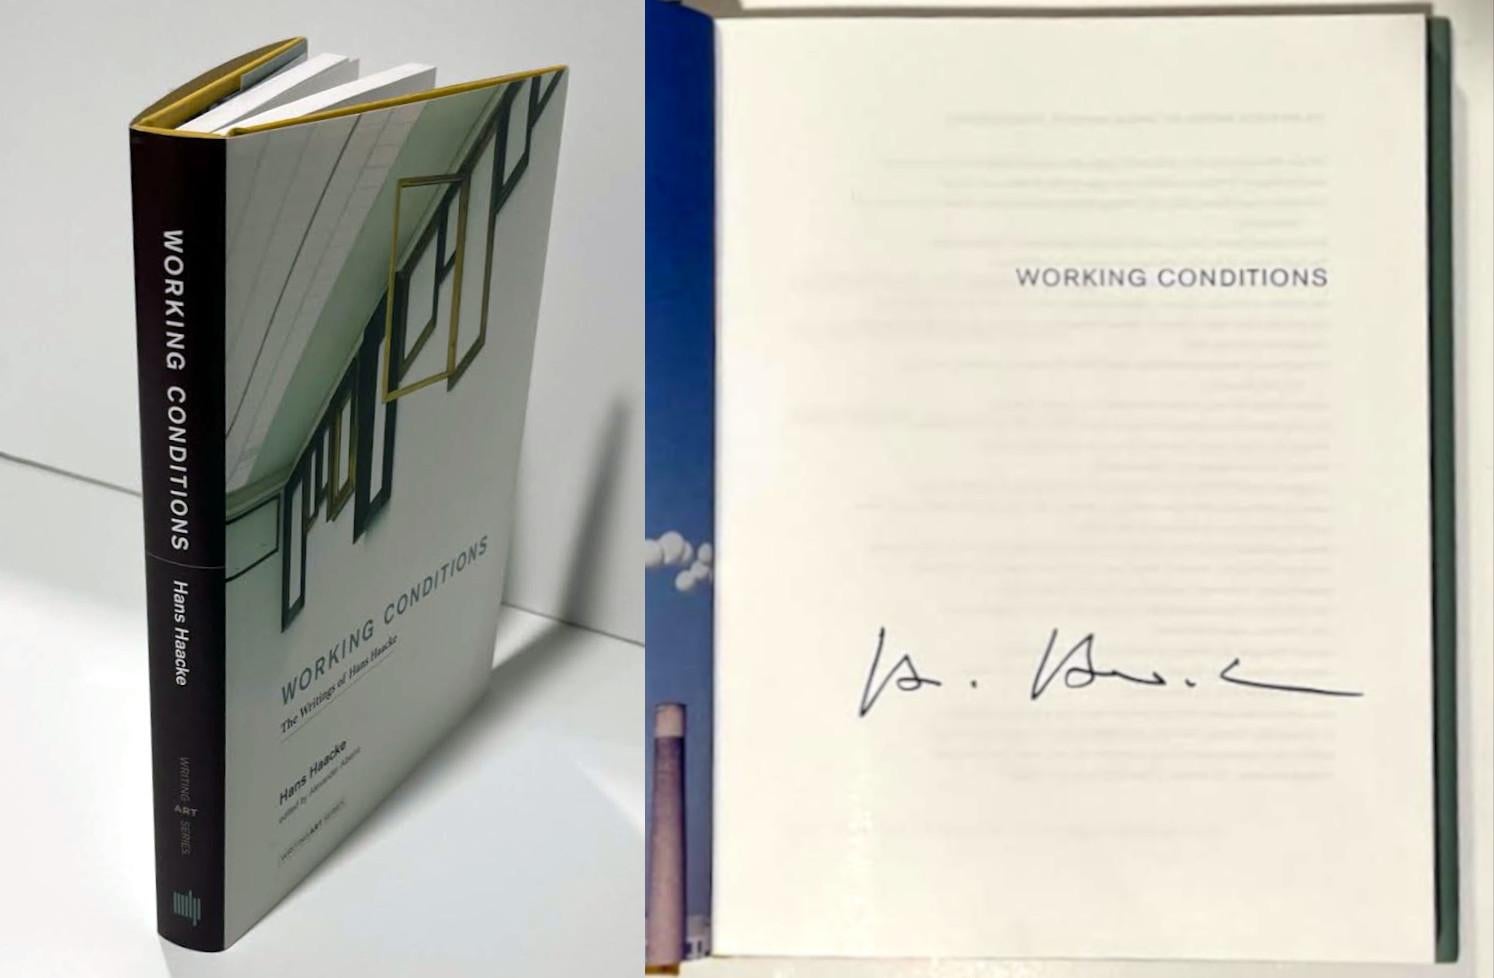 Monograph: Working Conditions (Hand signed by Hans Haacke) - Art by Hans Haacke 